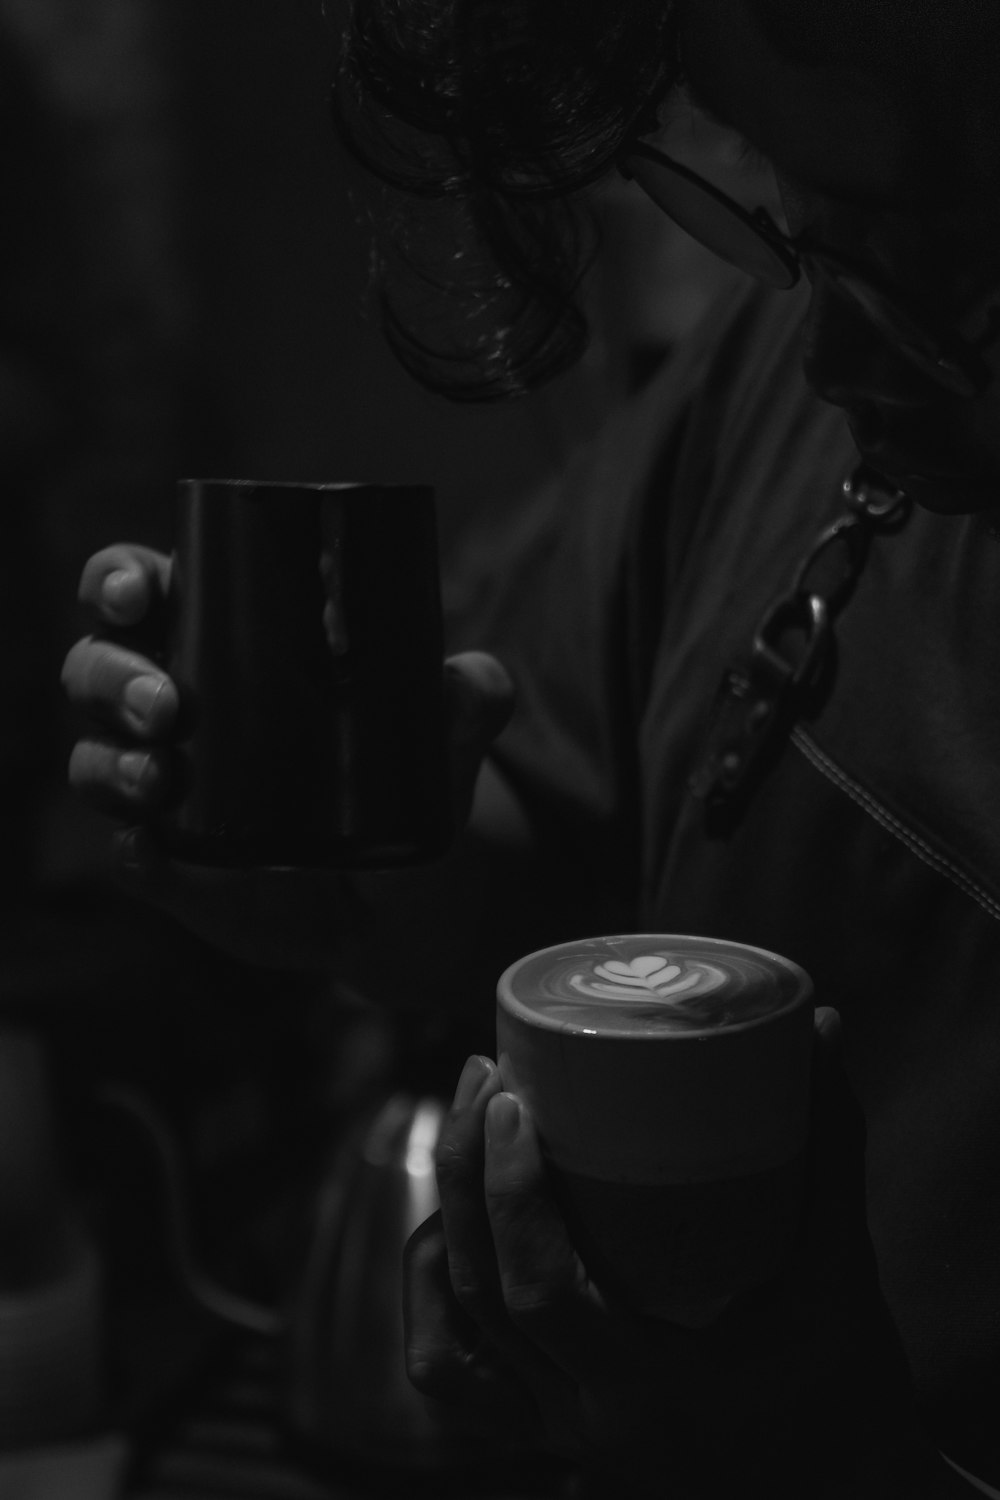 person holding ceramic mug in grayscale photography